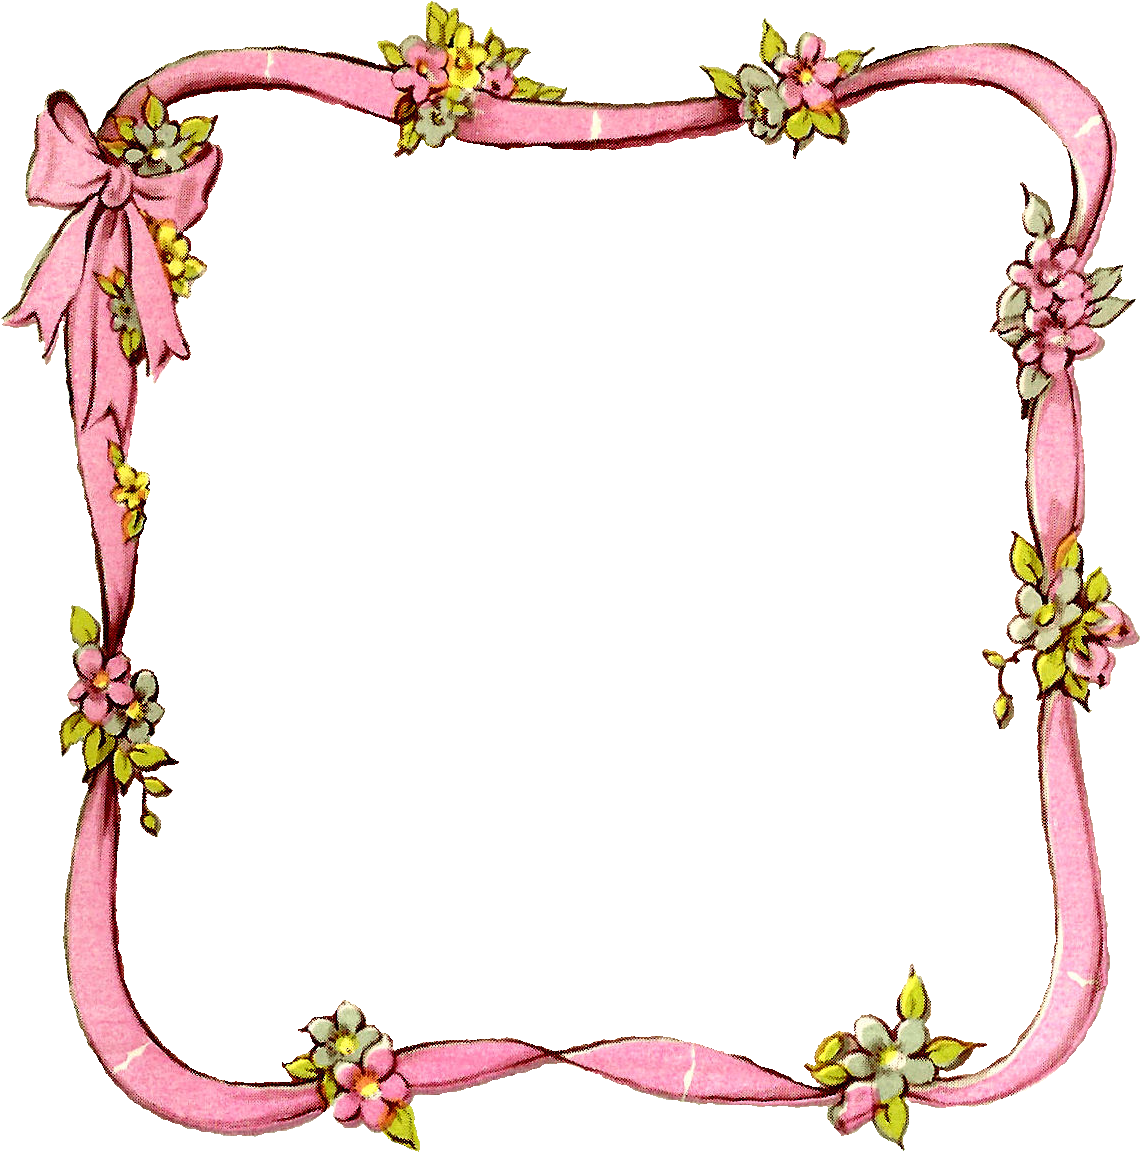 Frame Ribbon Digital Image Flower Crafting Download - Best Borders For School Projects (1323x1323)